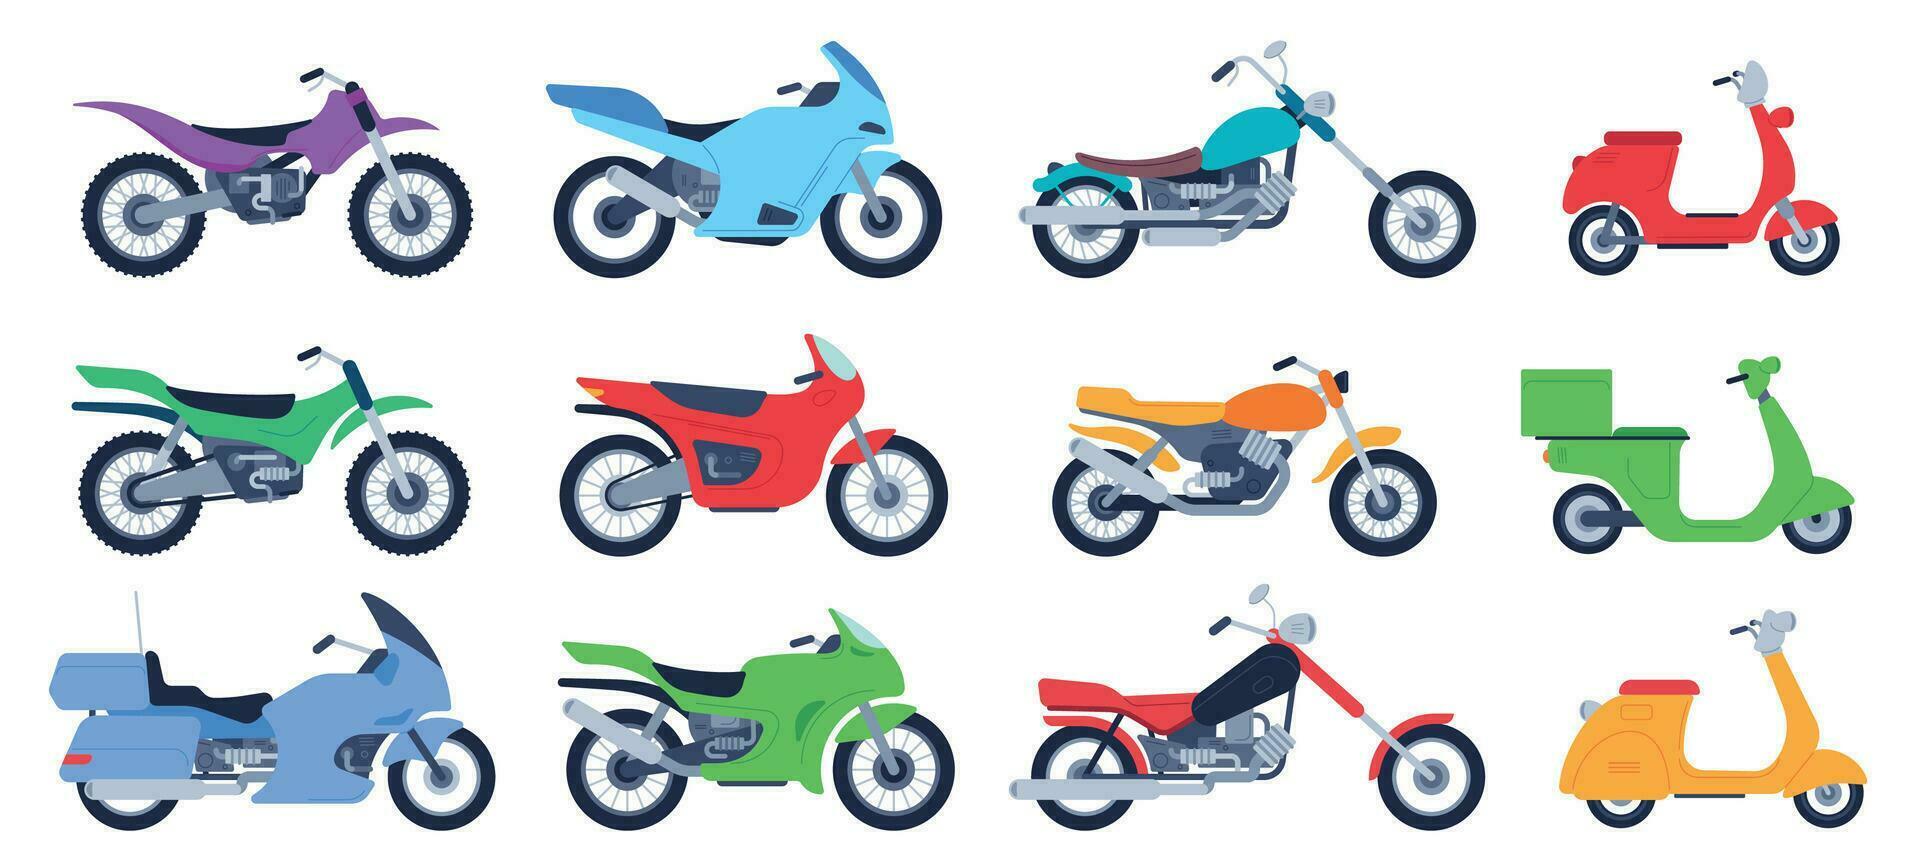 Flat motorbike. Biker motorcycles, city delivery scooters and road bikes. Retro choppers, sport motorcycle and motor side view vector illustration set